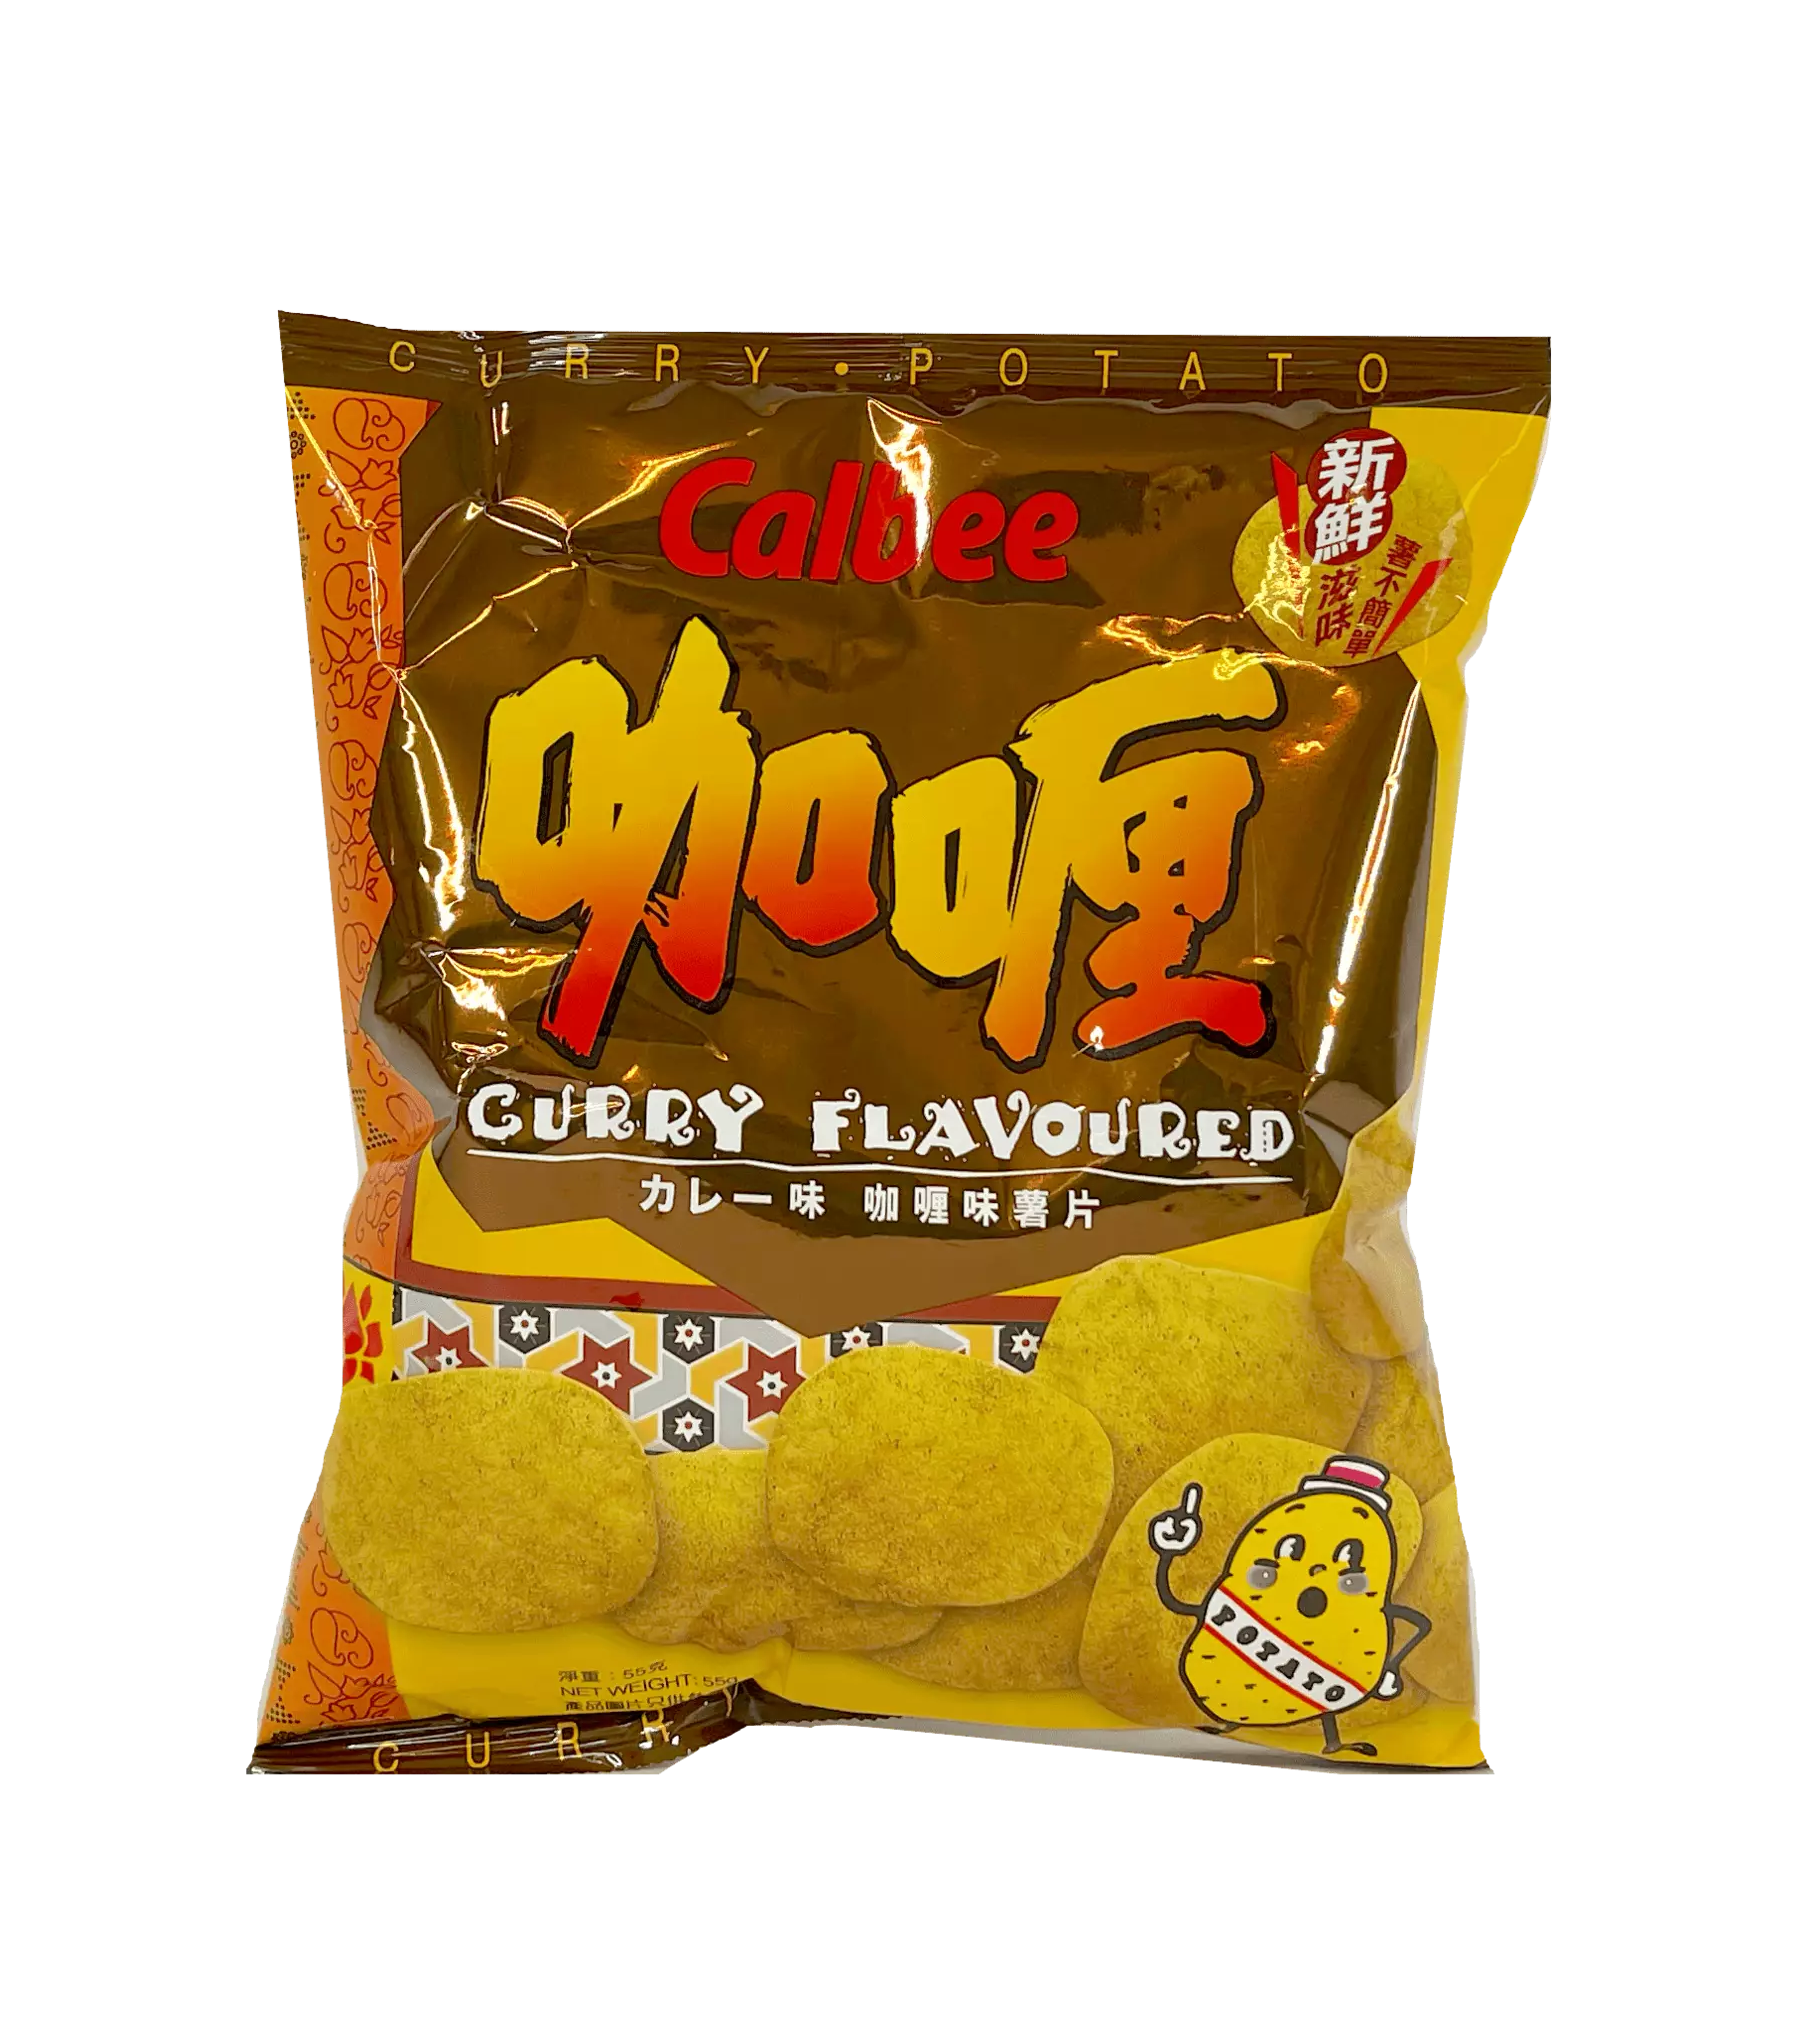 Potato Chips With Curry Flavour 55g Calbee China